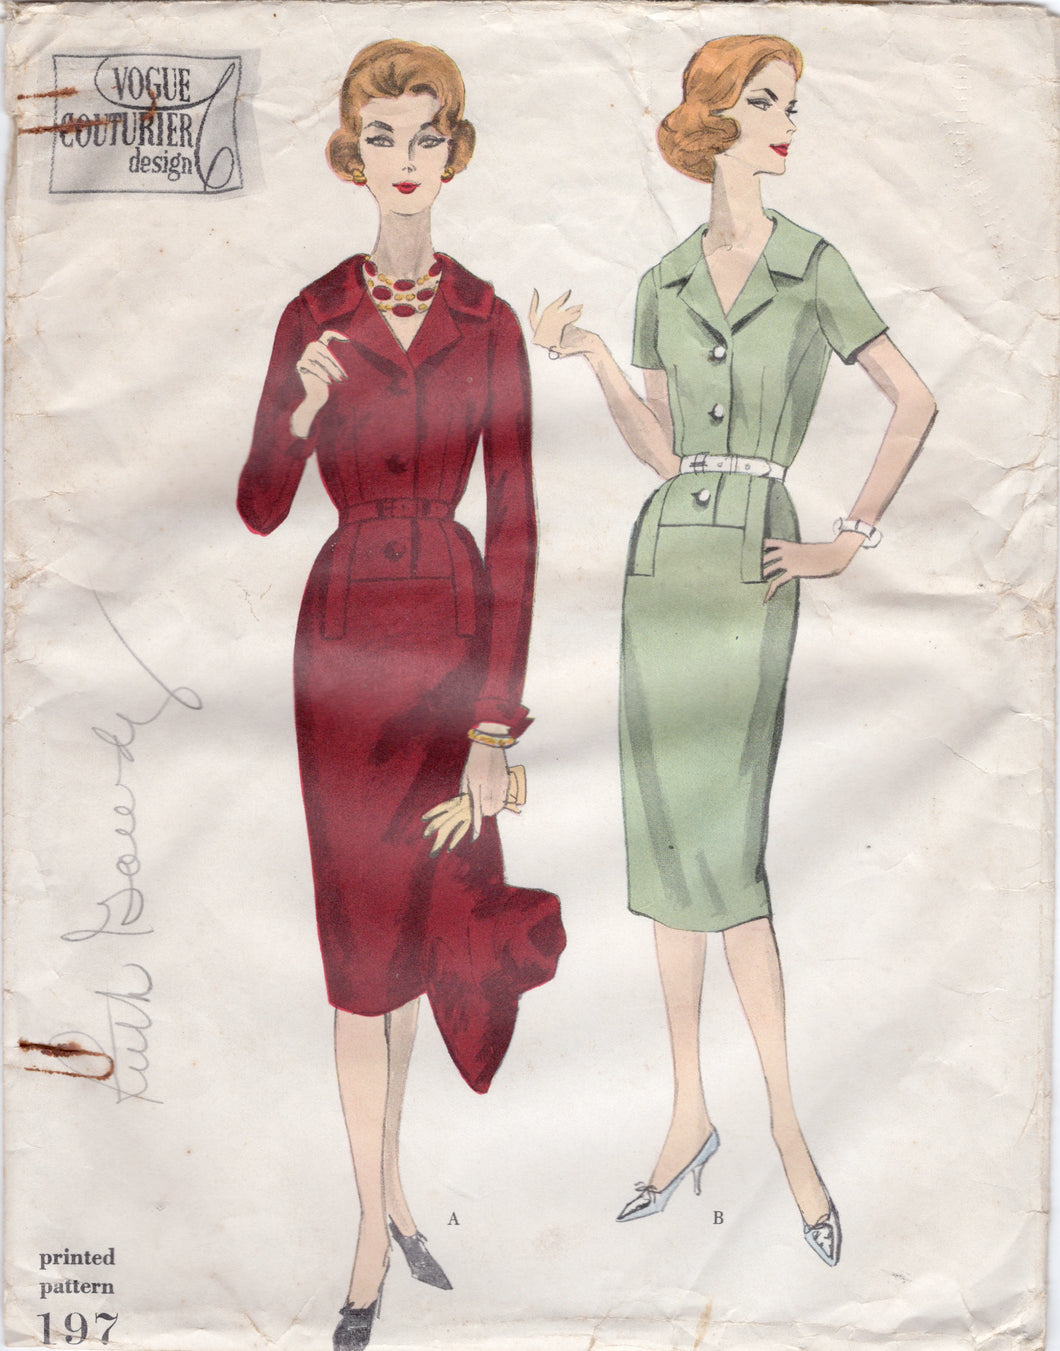 1950's Vogue Couturier Design Sheath Dress Pattern with Pockets - Bust 36